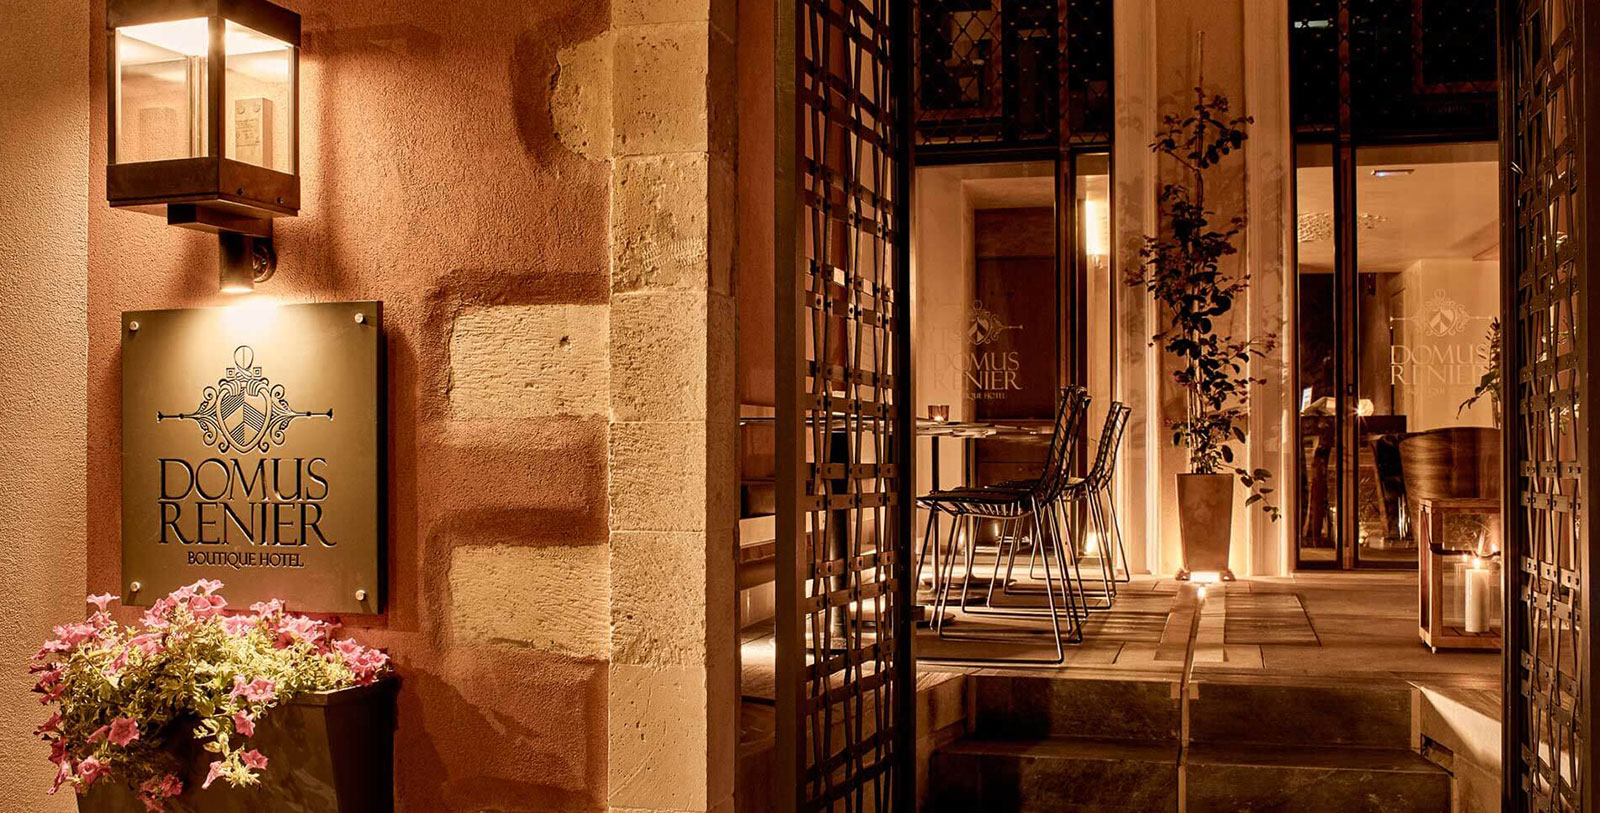 Image of hotel entrance, Domus Renier Boutique Hotel, 1608, Member of Historic Hotels Worldwide, in Chania, Greece, Explore